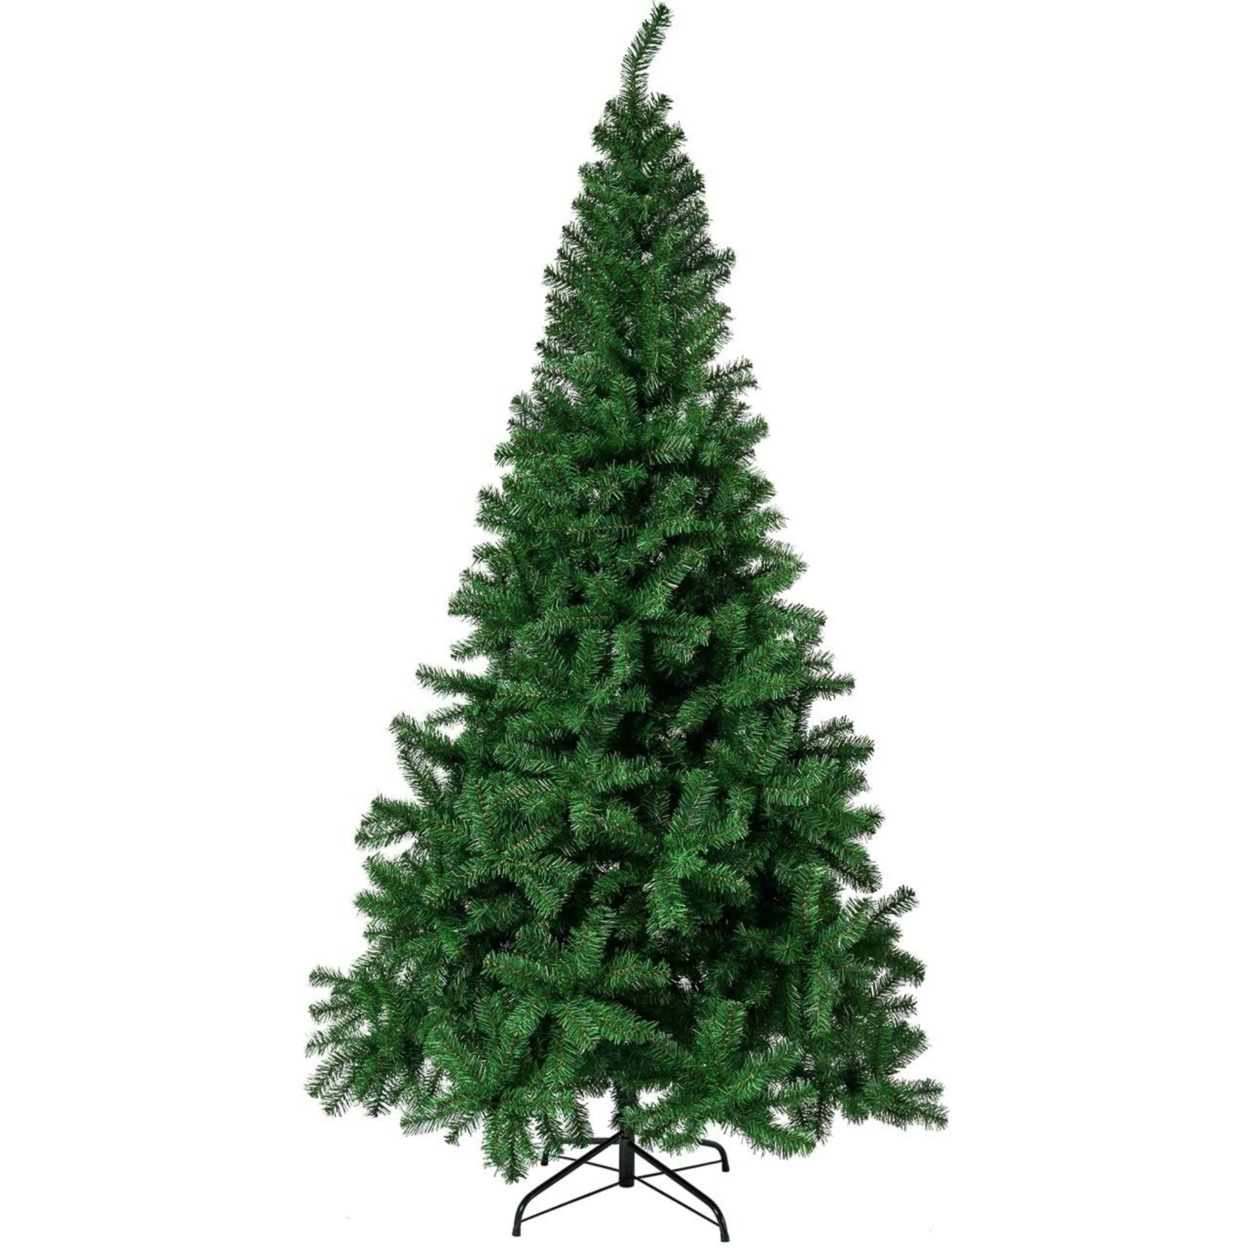 Artificial Christmas Tree With Stand, 6 Ft - 400 Tips